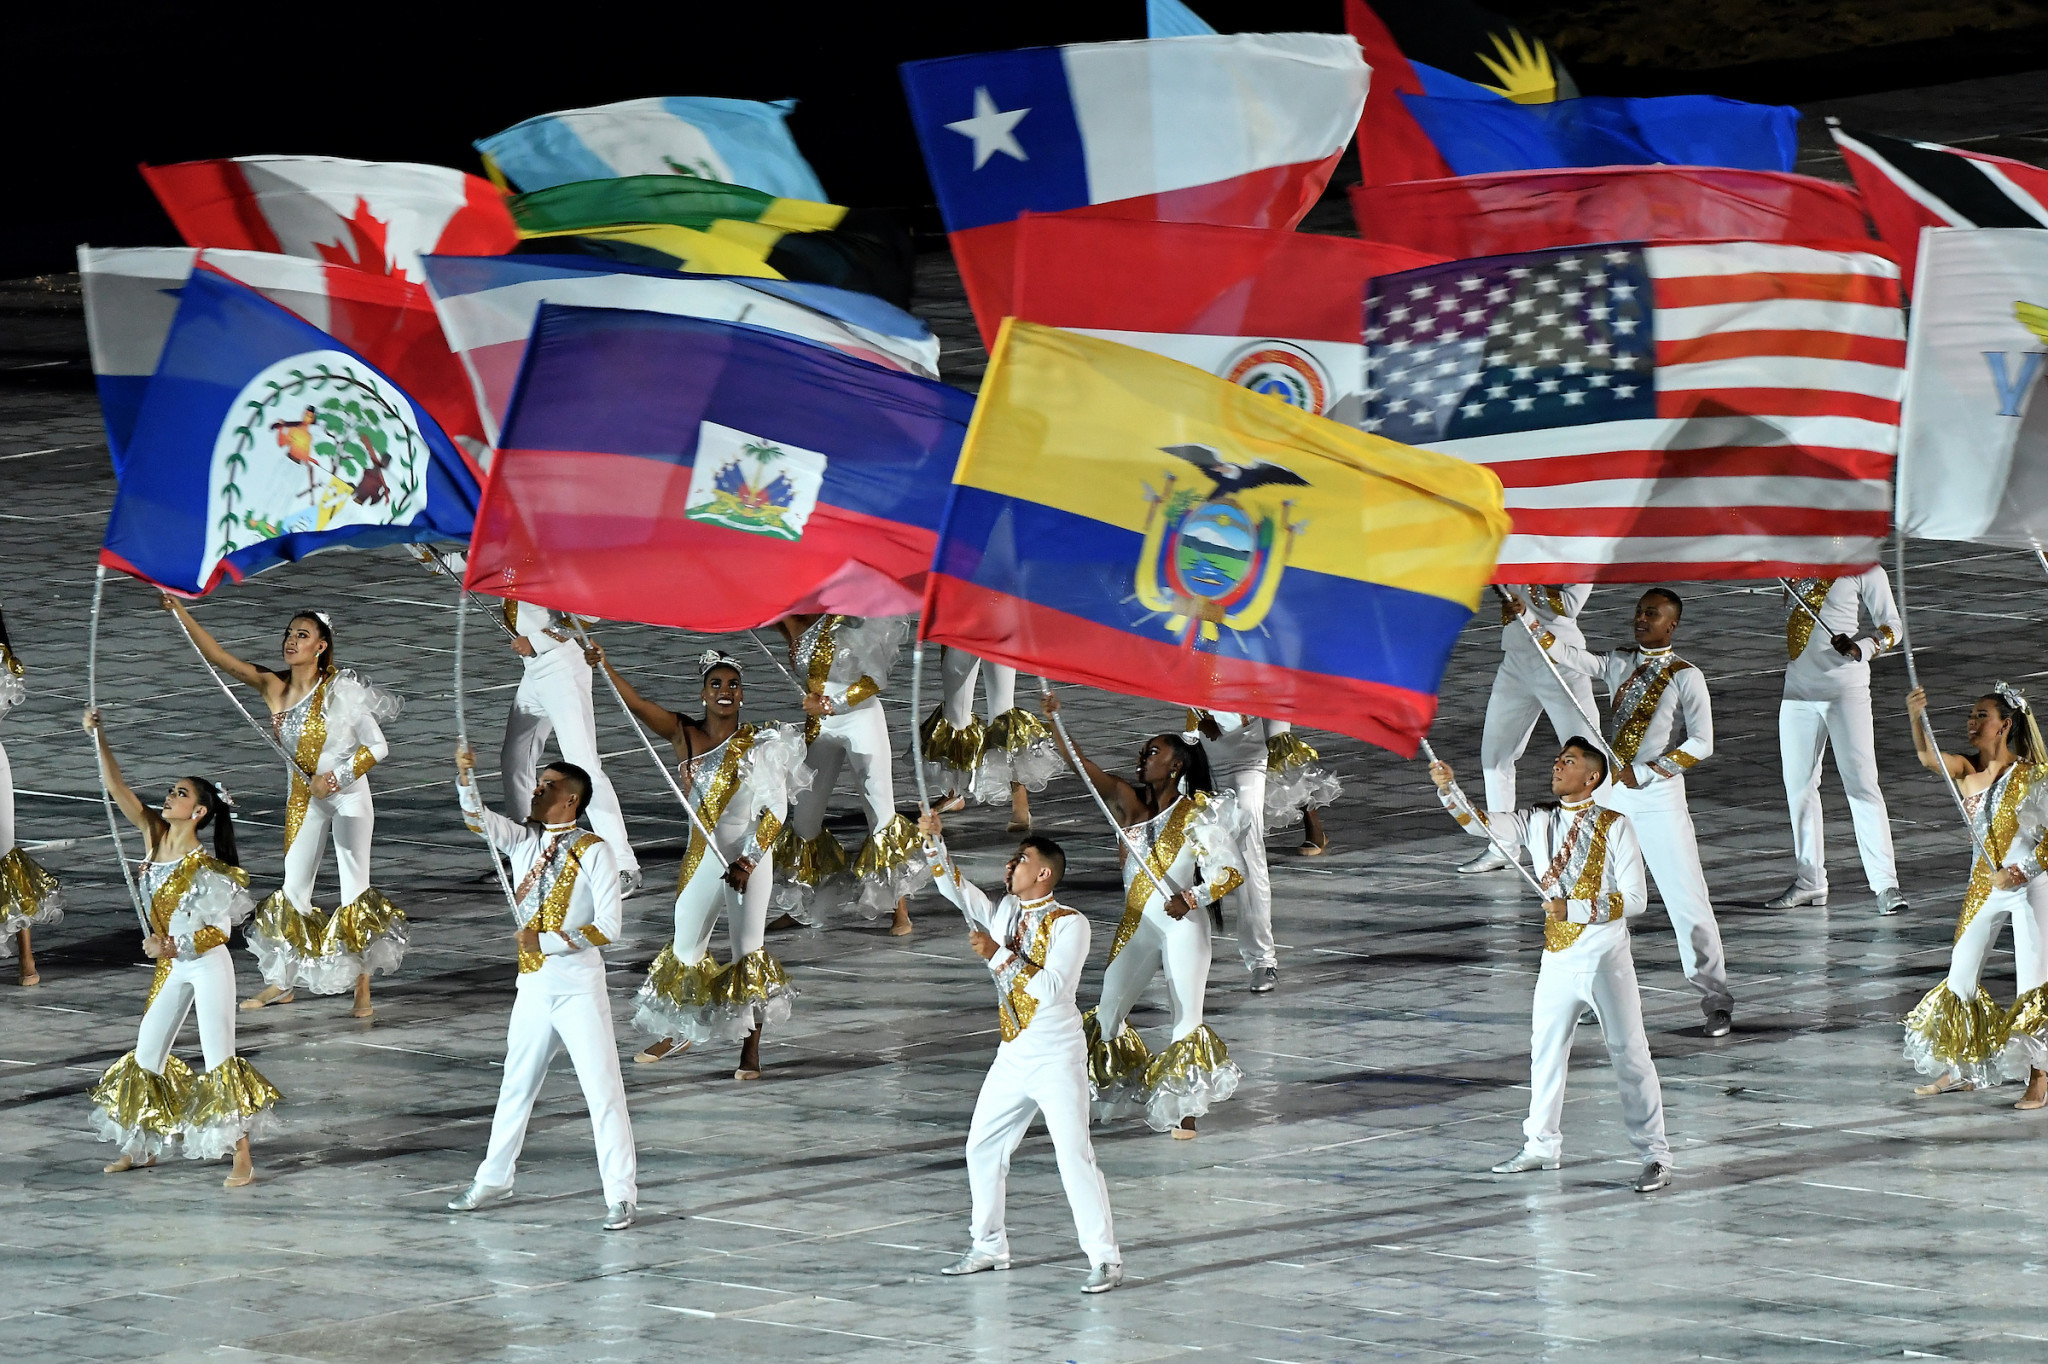 Flags of the 41 Panam Sports nations and territories were flown during a dance performance at the Opening Ceremony ©Agencia.XpressMedia